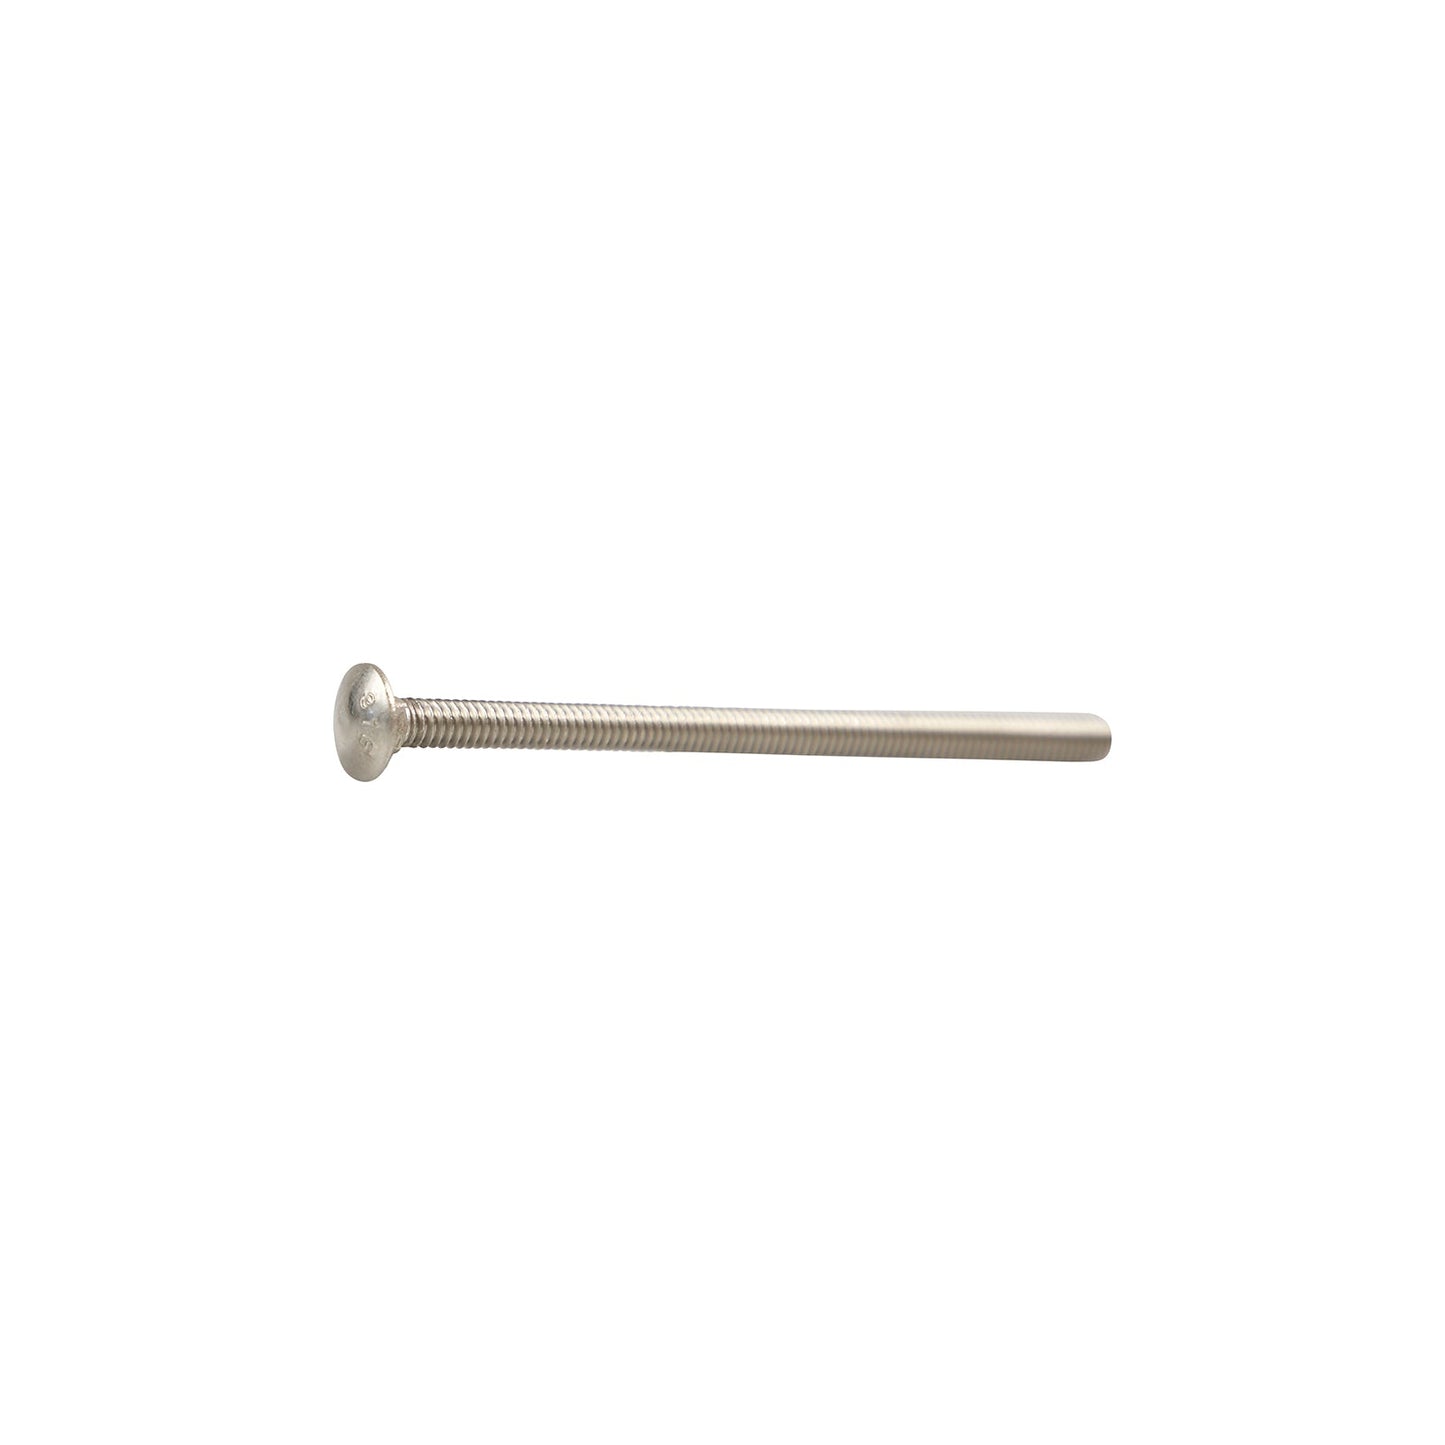 1/4"-20 x 4-1/2" Conquest Carriage Bolt - 316 Stainless Steel